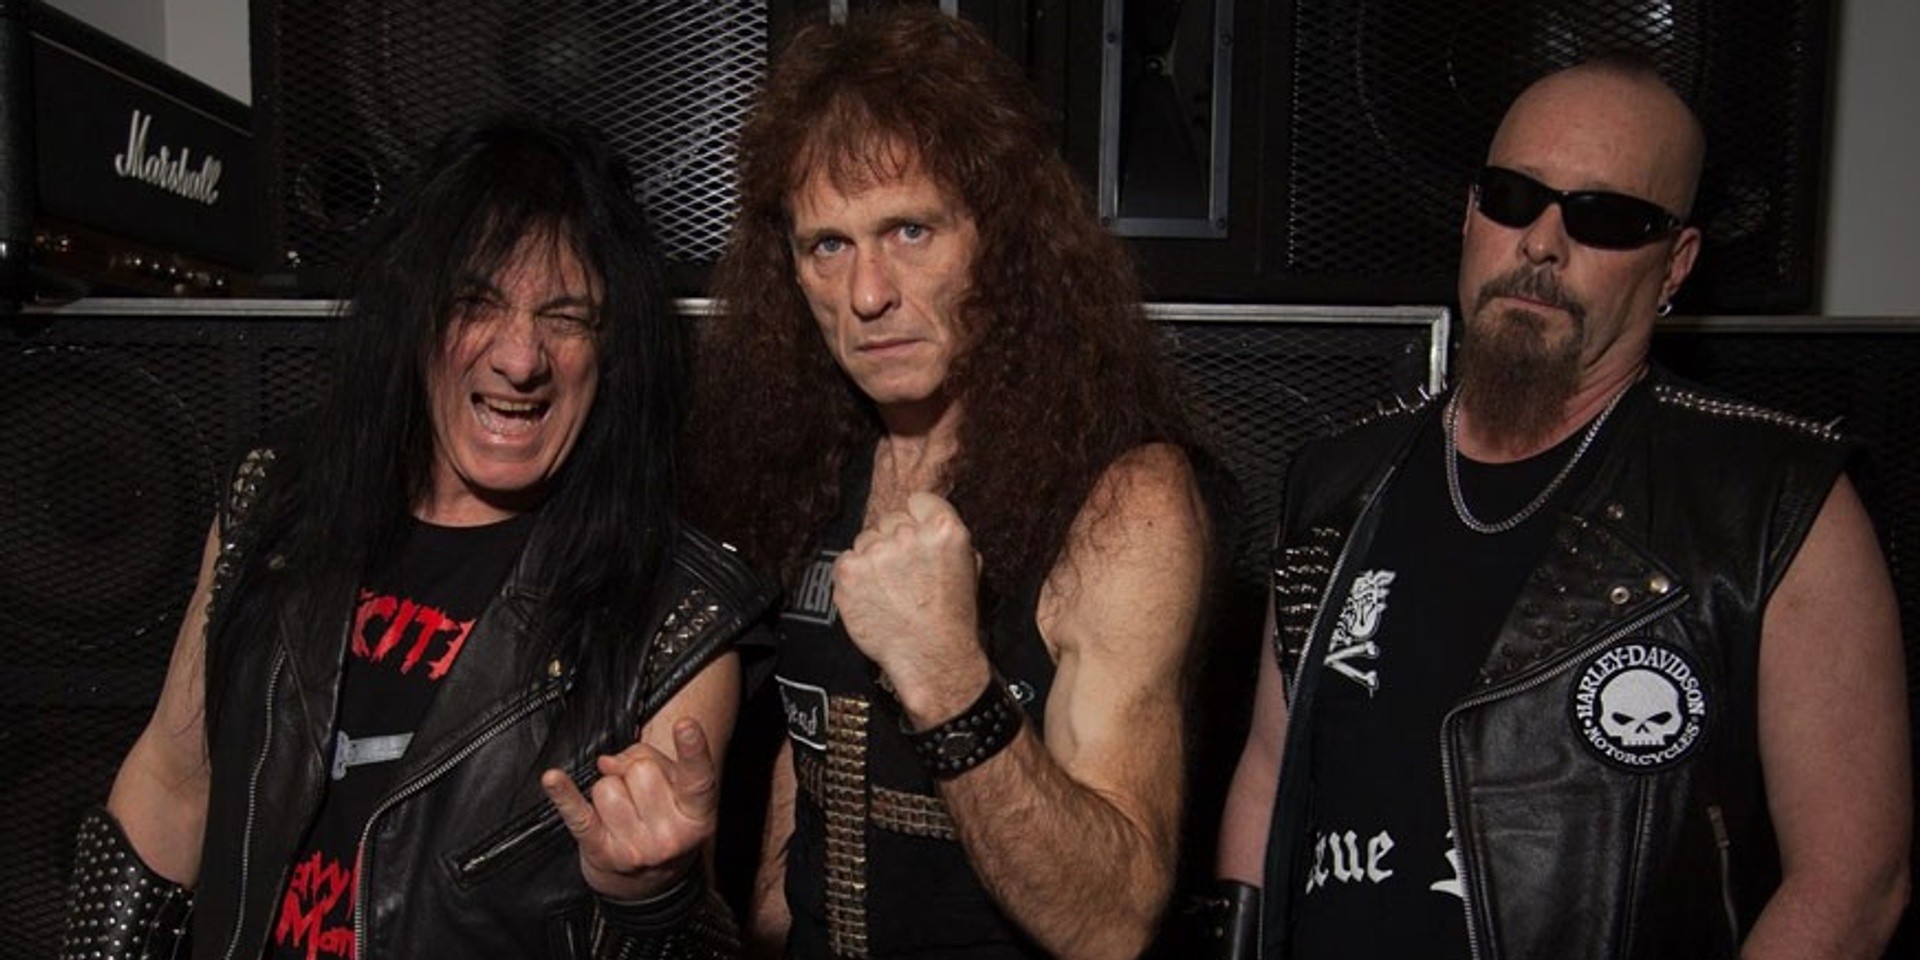 Speed metal pioneers Exciter to perform in Singapore with original line-up